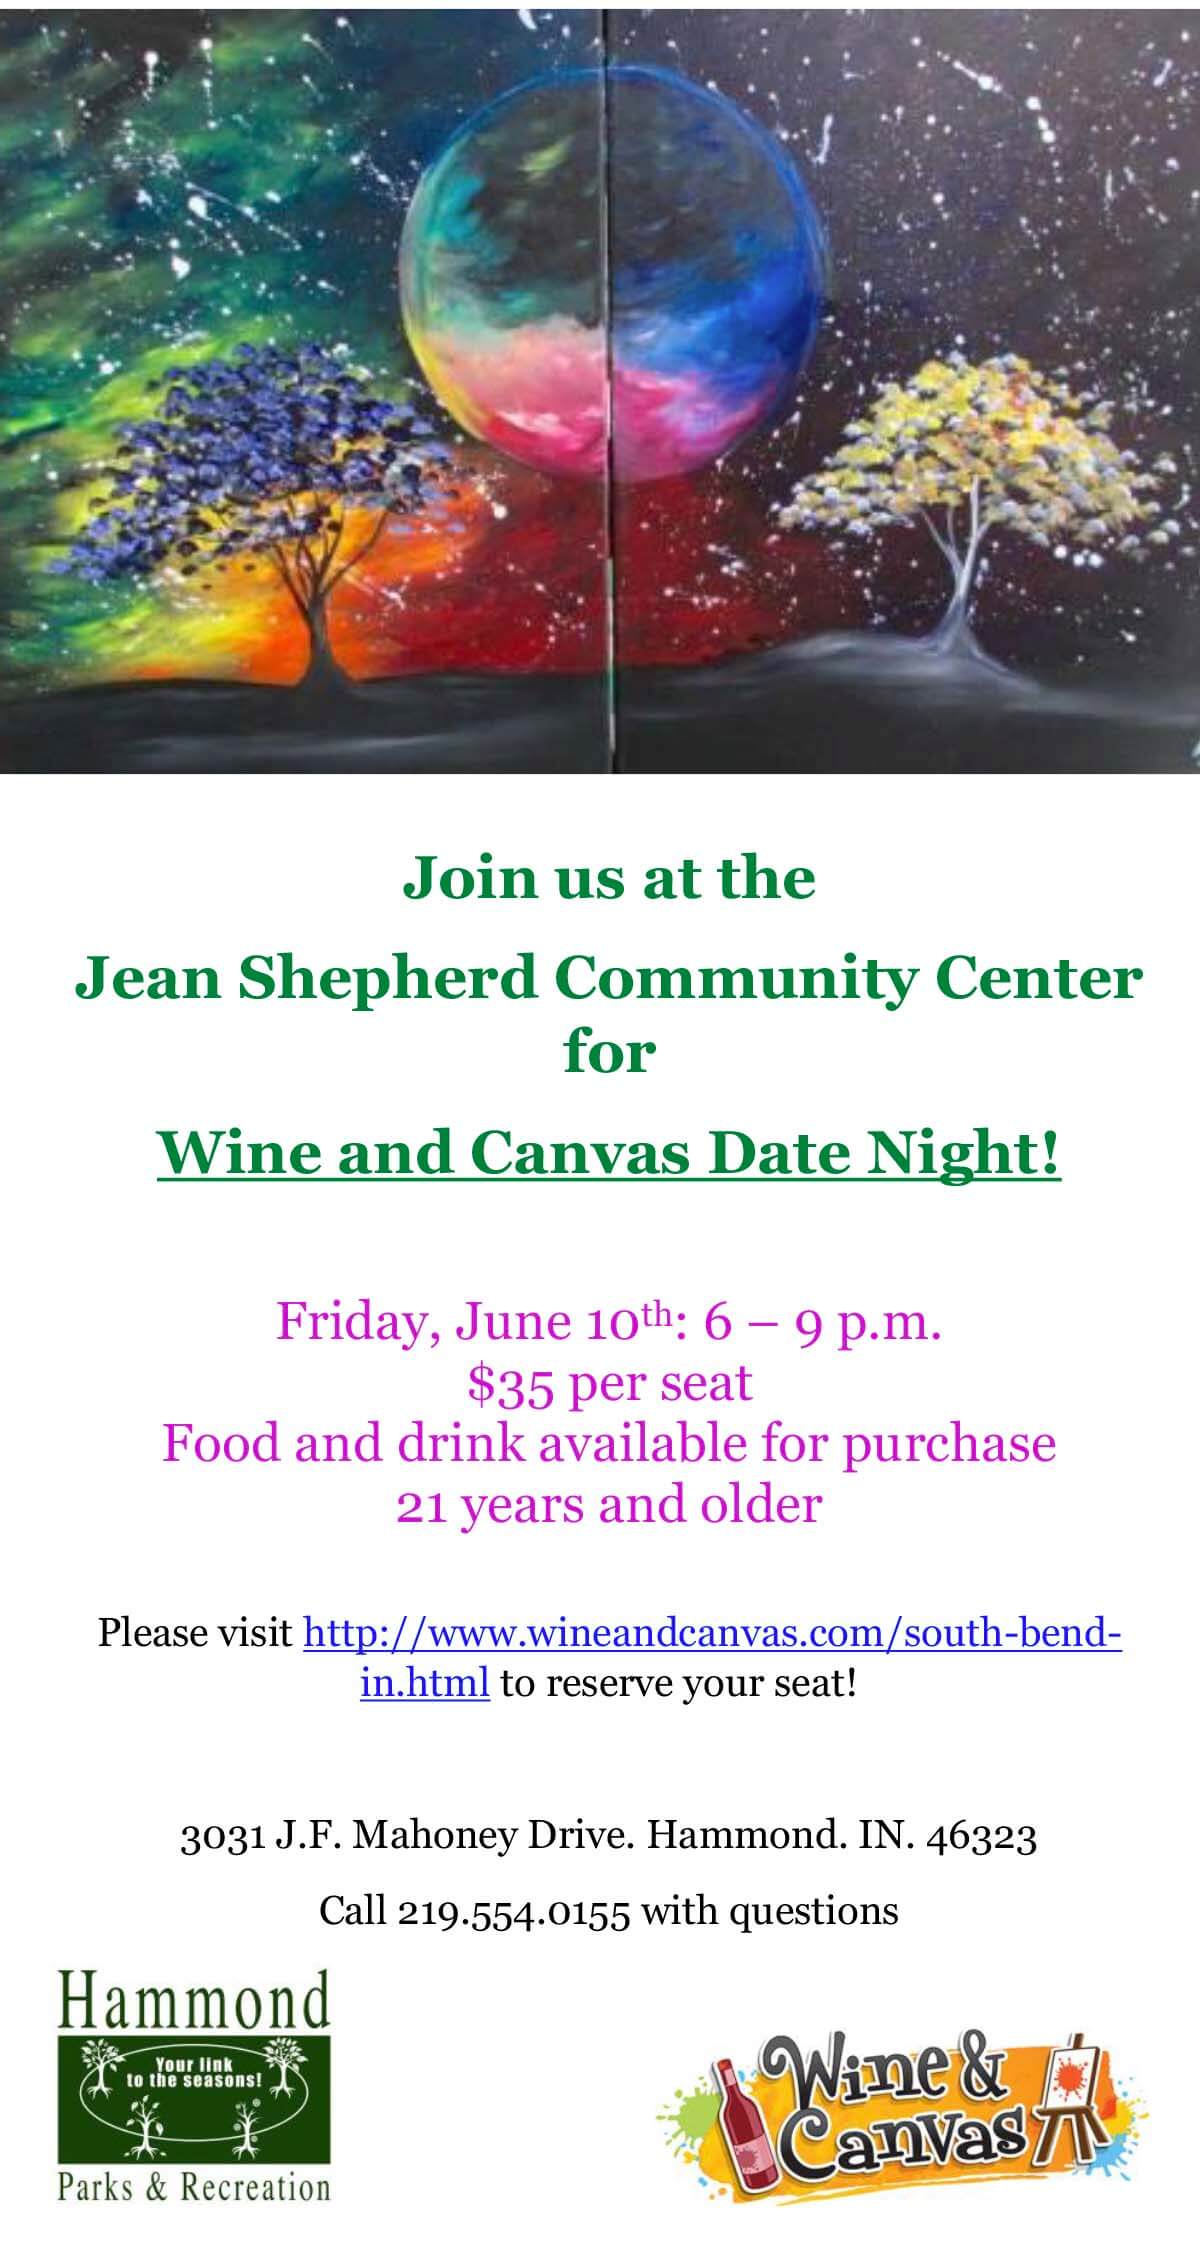 “Wine & Canvas” Returns to Hammond in May